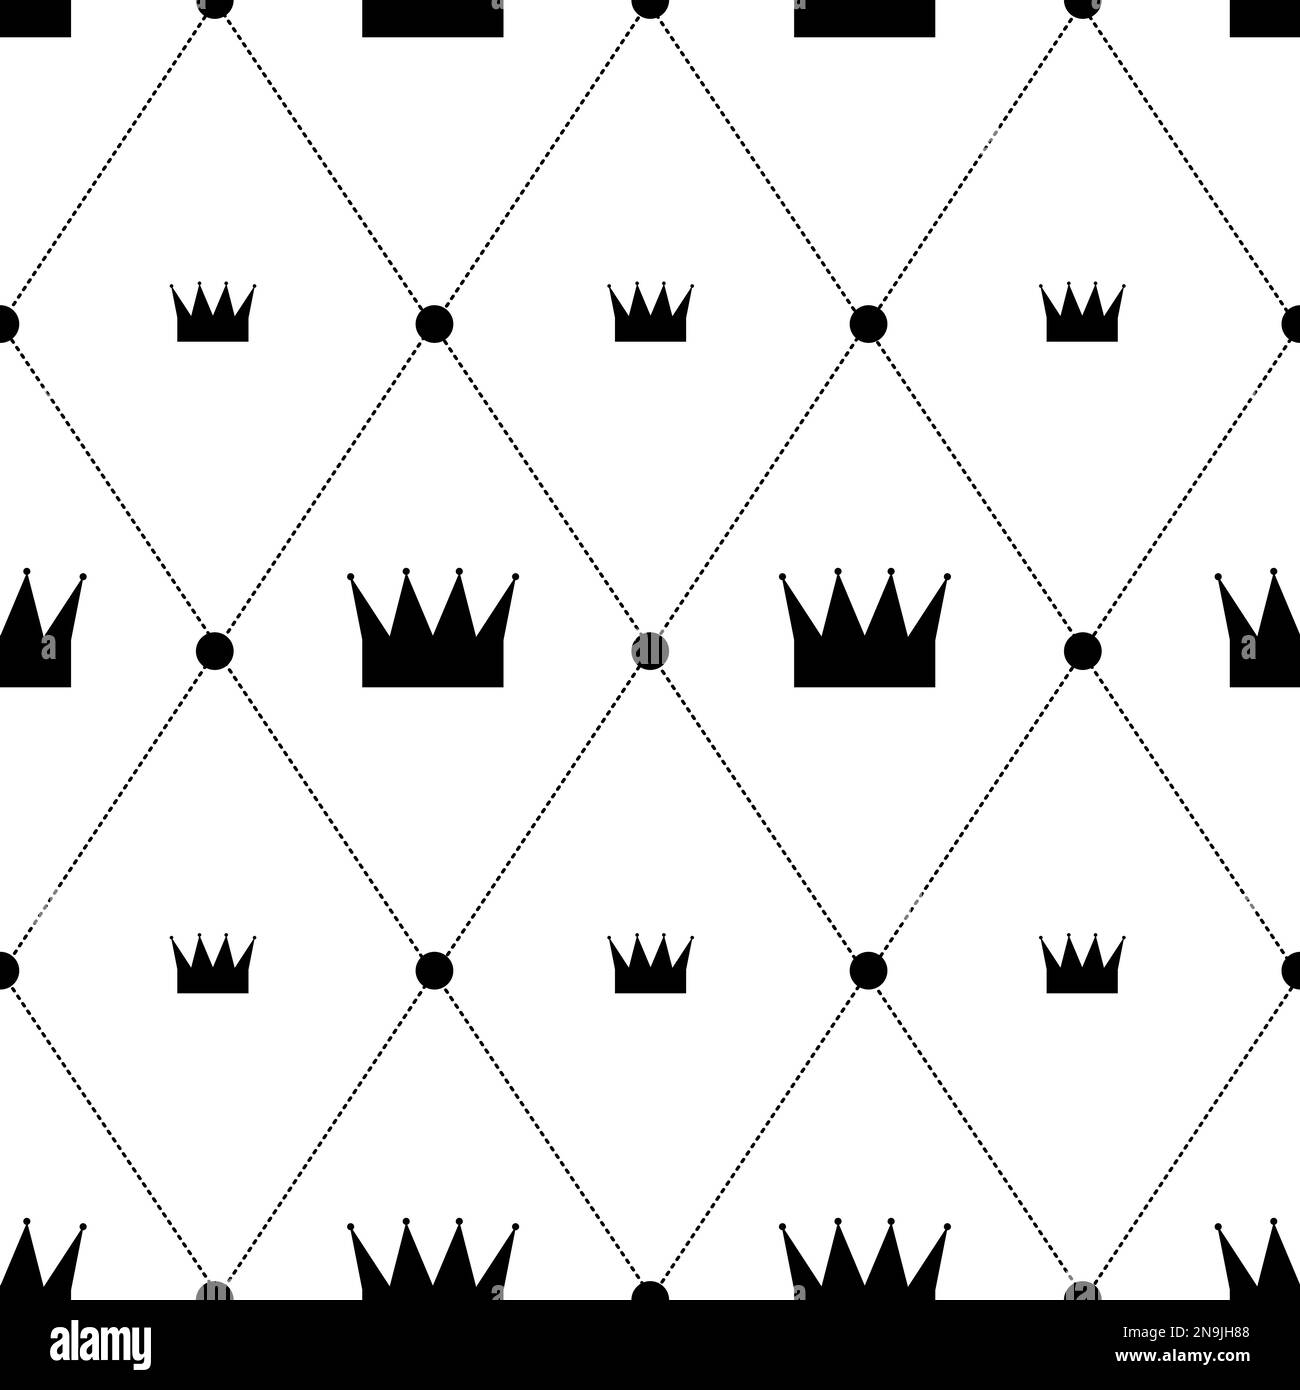 Crown wallpaper Black and White Stock Photos & Images - Alamy